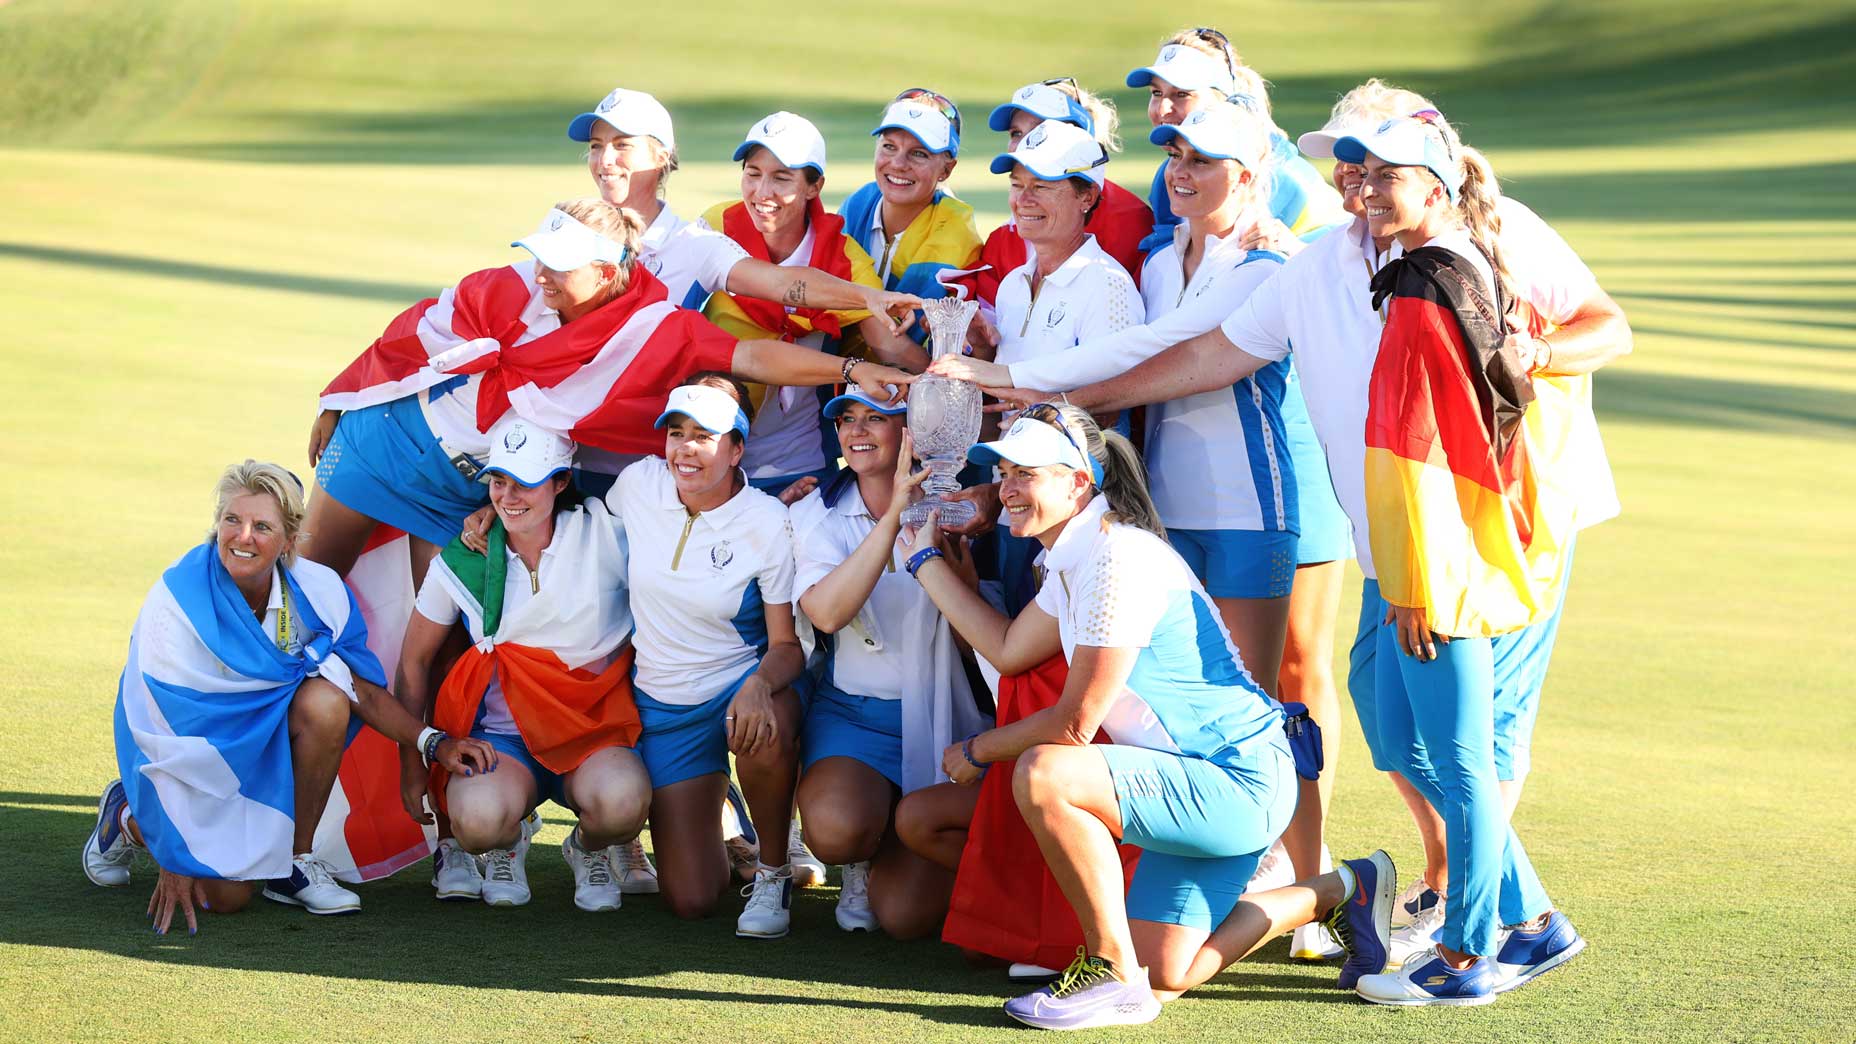 How Team Europe, alone and outmatched, stole the Solheim Cup on U.S. soil